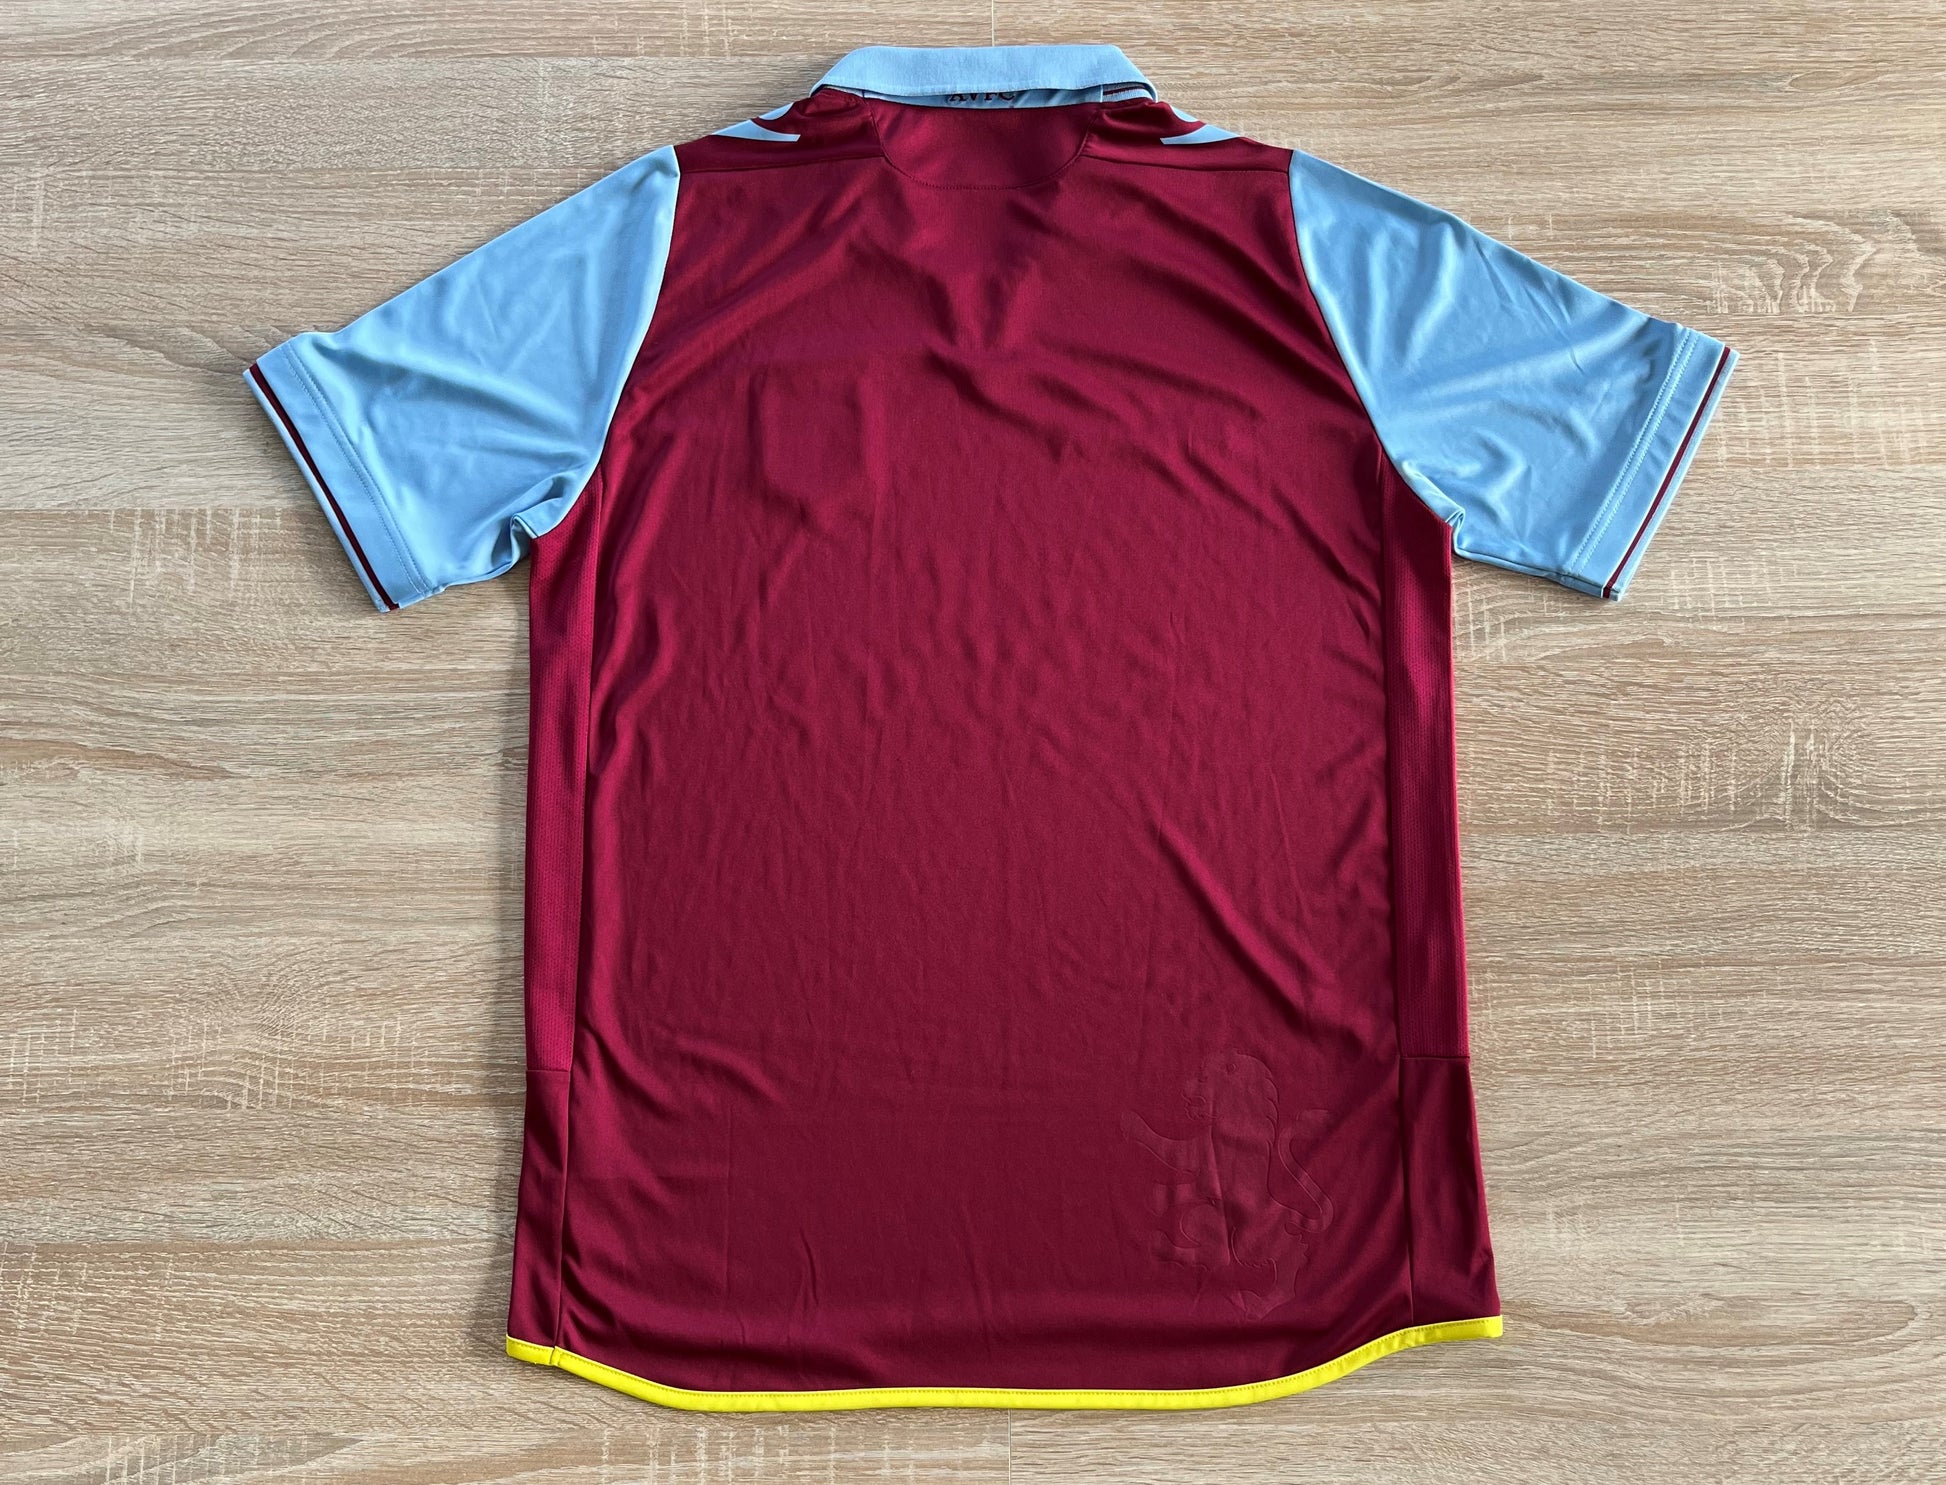 Aston Villa Home Shirt from 2012-2013: The home jersey worn by Aston Villa during the 2012-2013 season. This shirt features the club's emblem and captures the essence of the team's performance and commitment throughout that memorable period.